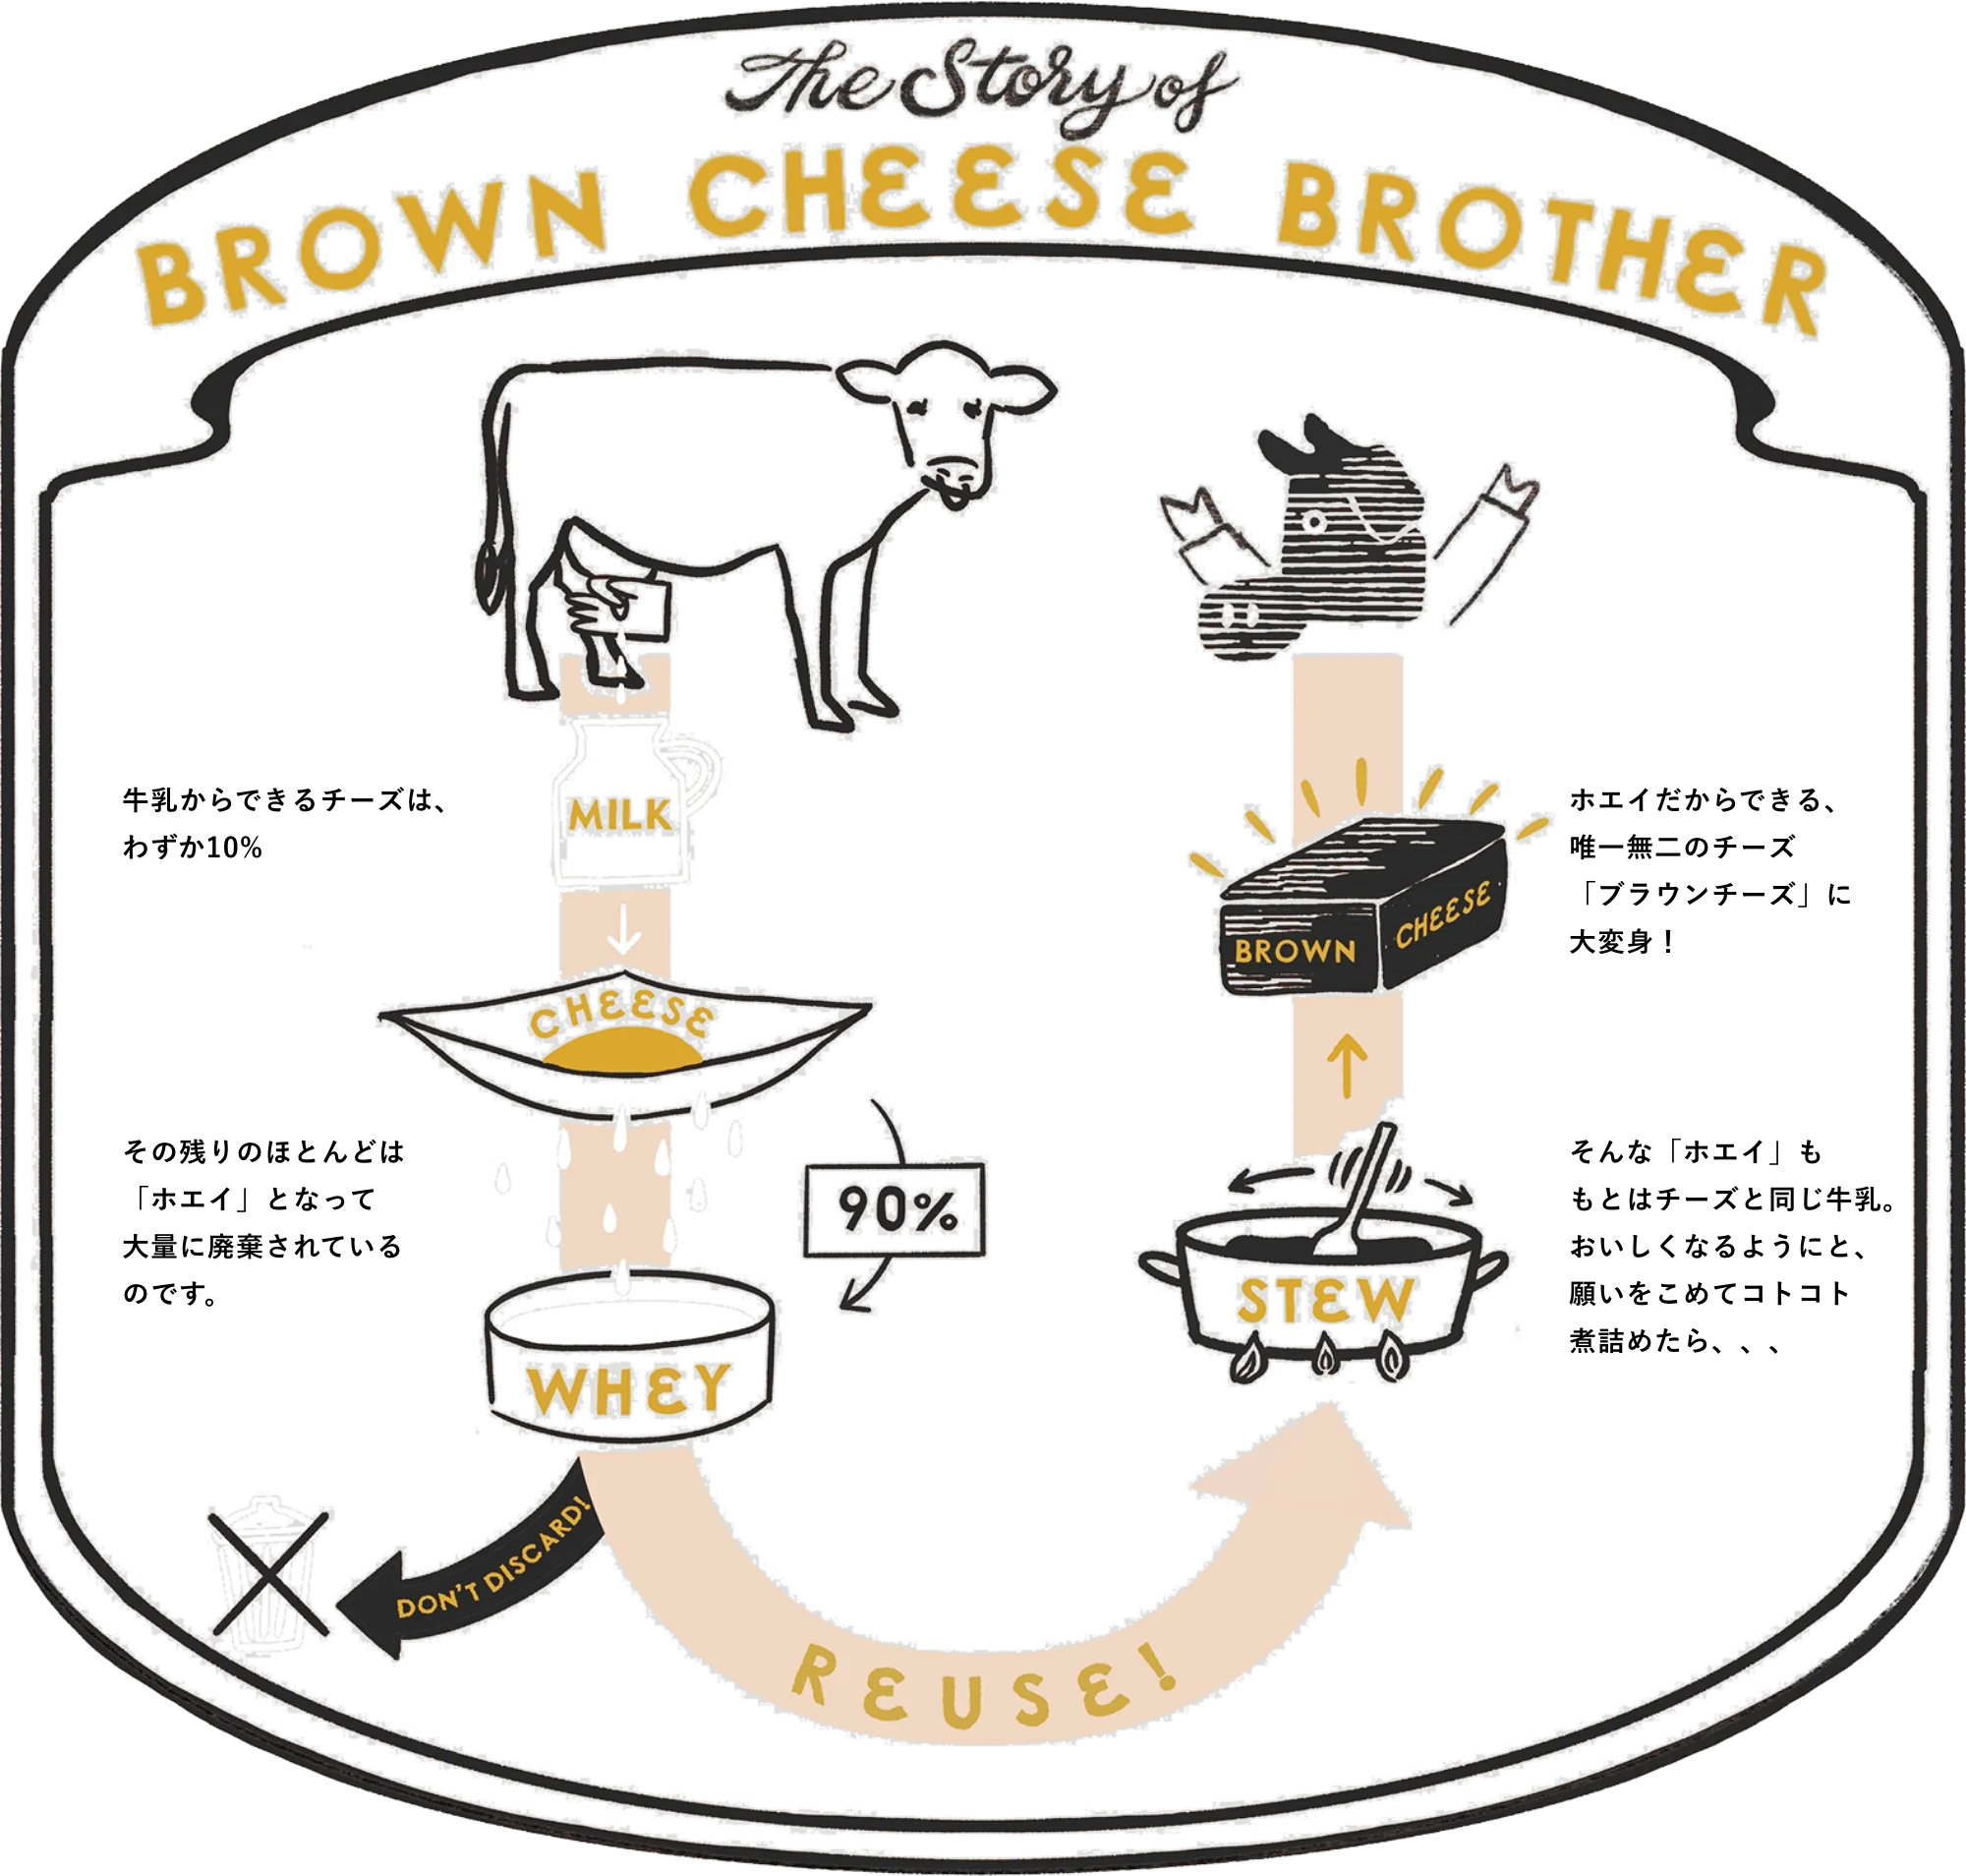 The Story of BROWN CHEESE BROTHER